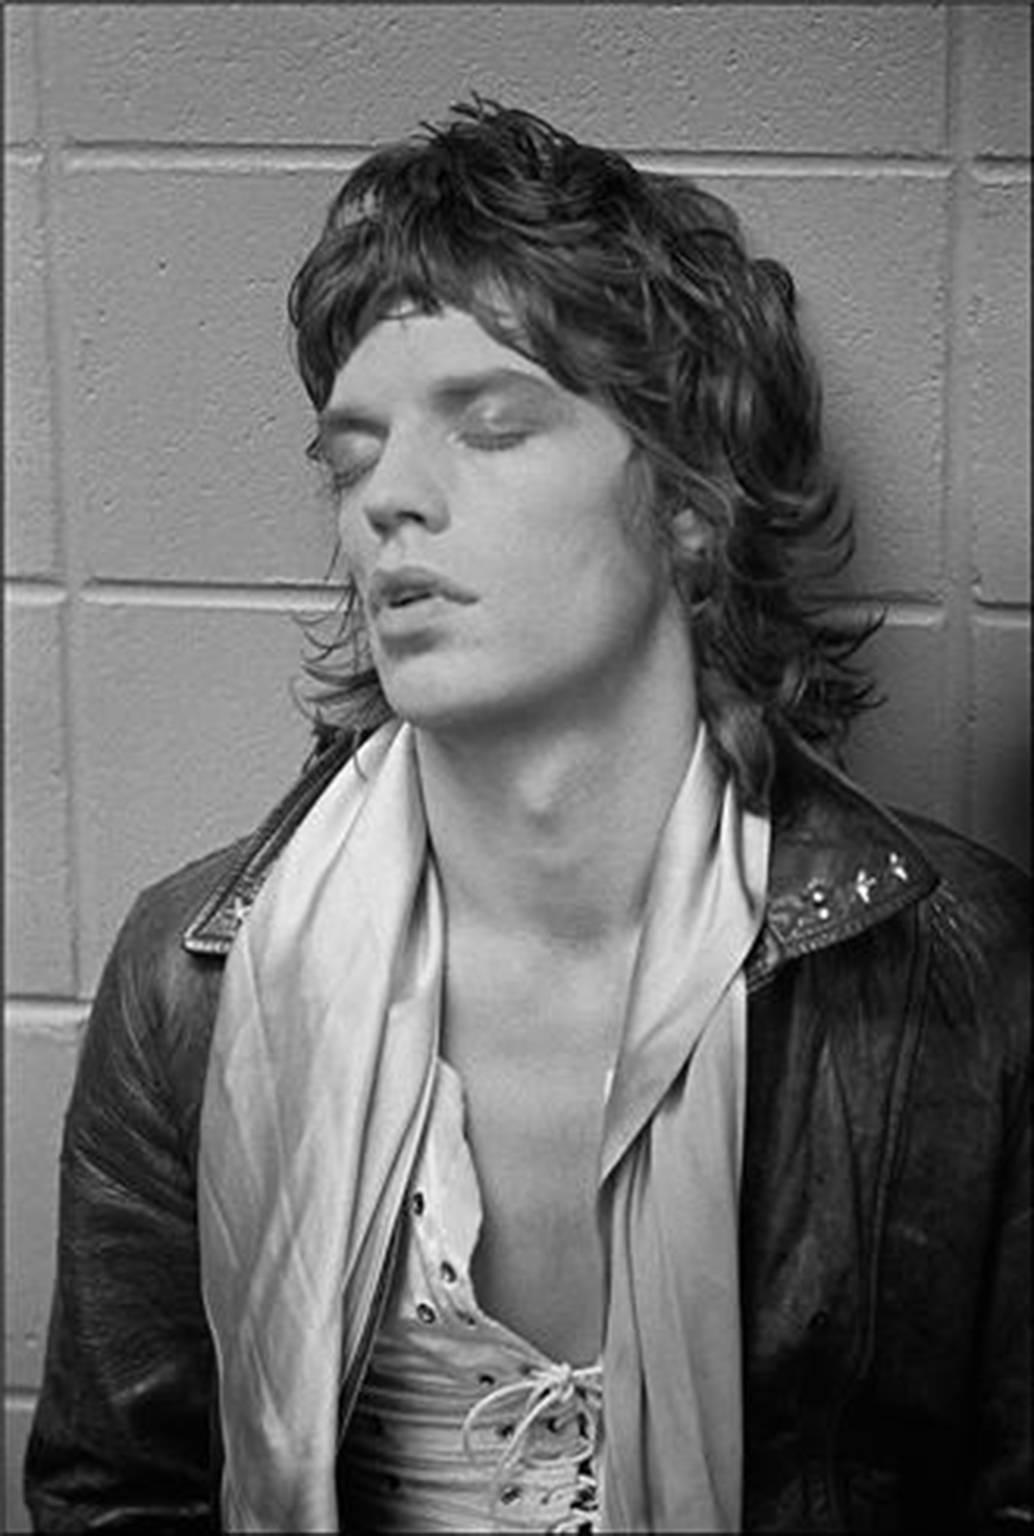 Ethan Russell Black and White Photograph - Mick Jagger, 1972